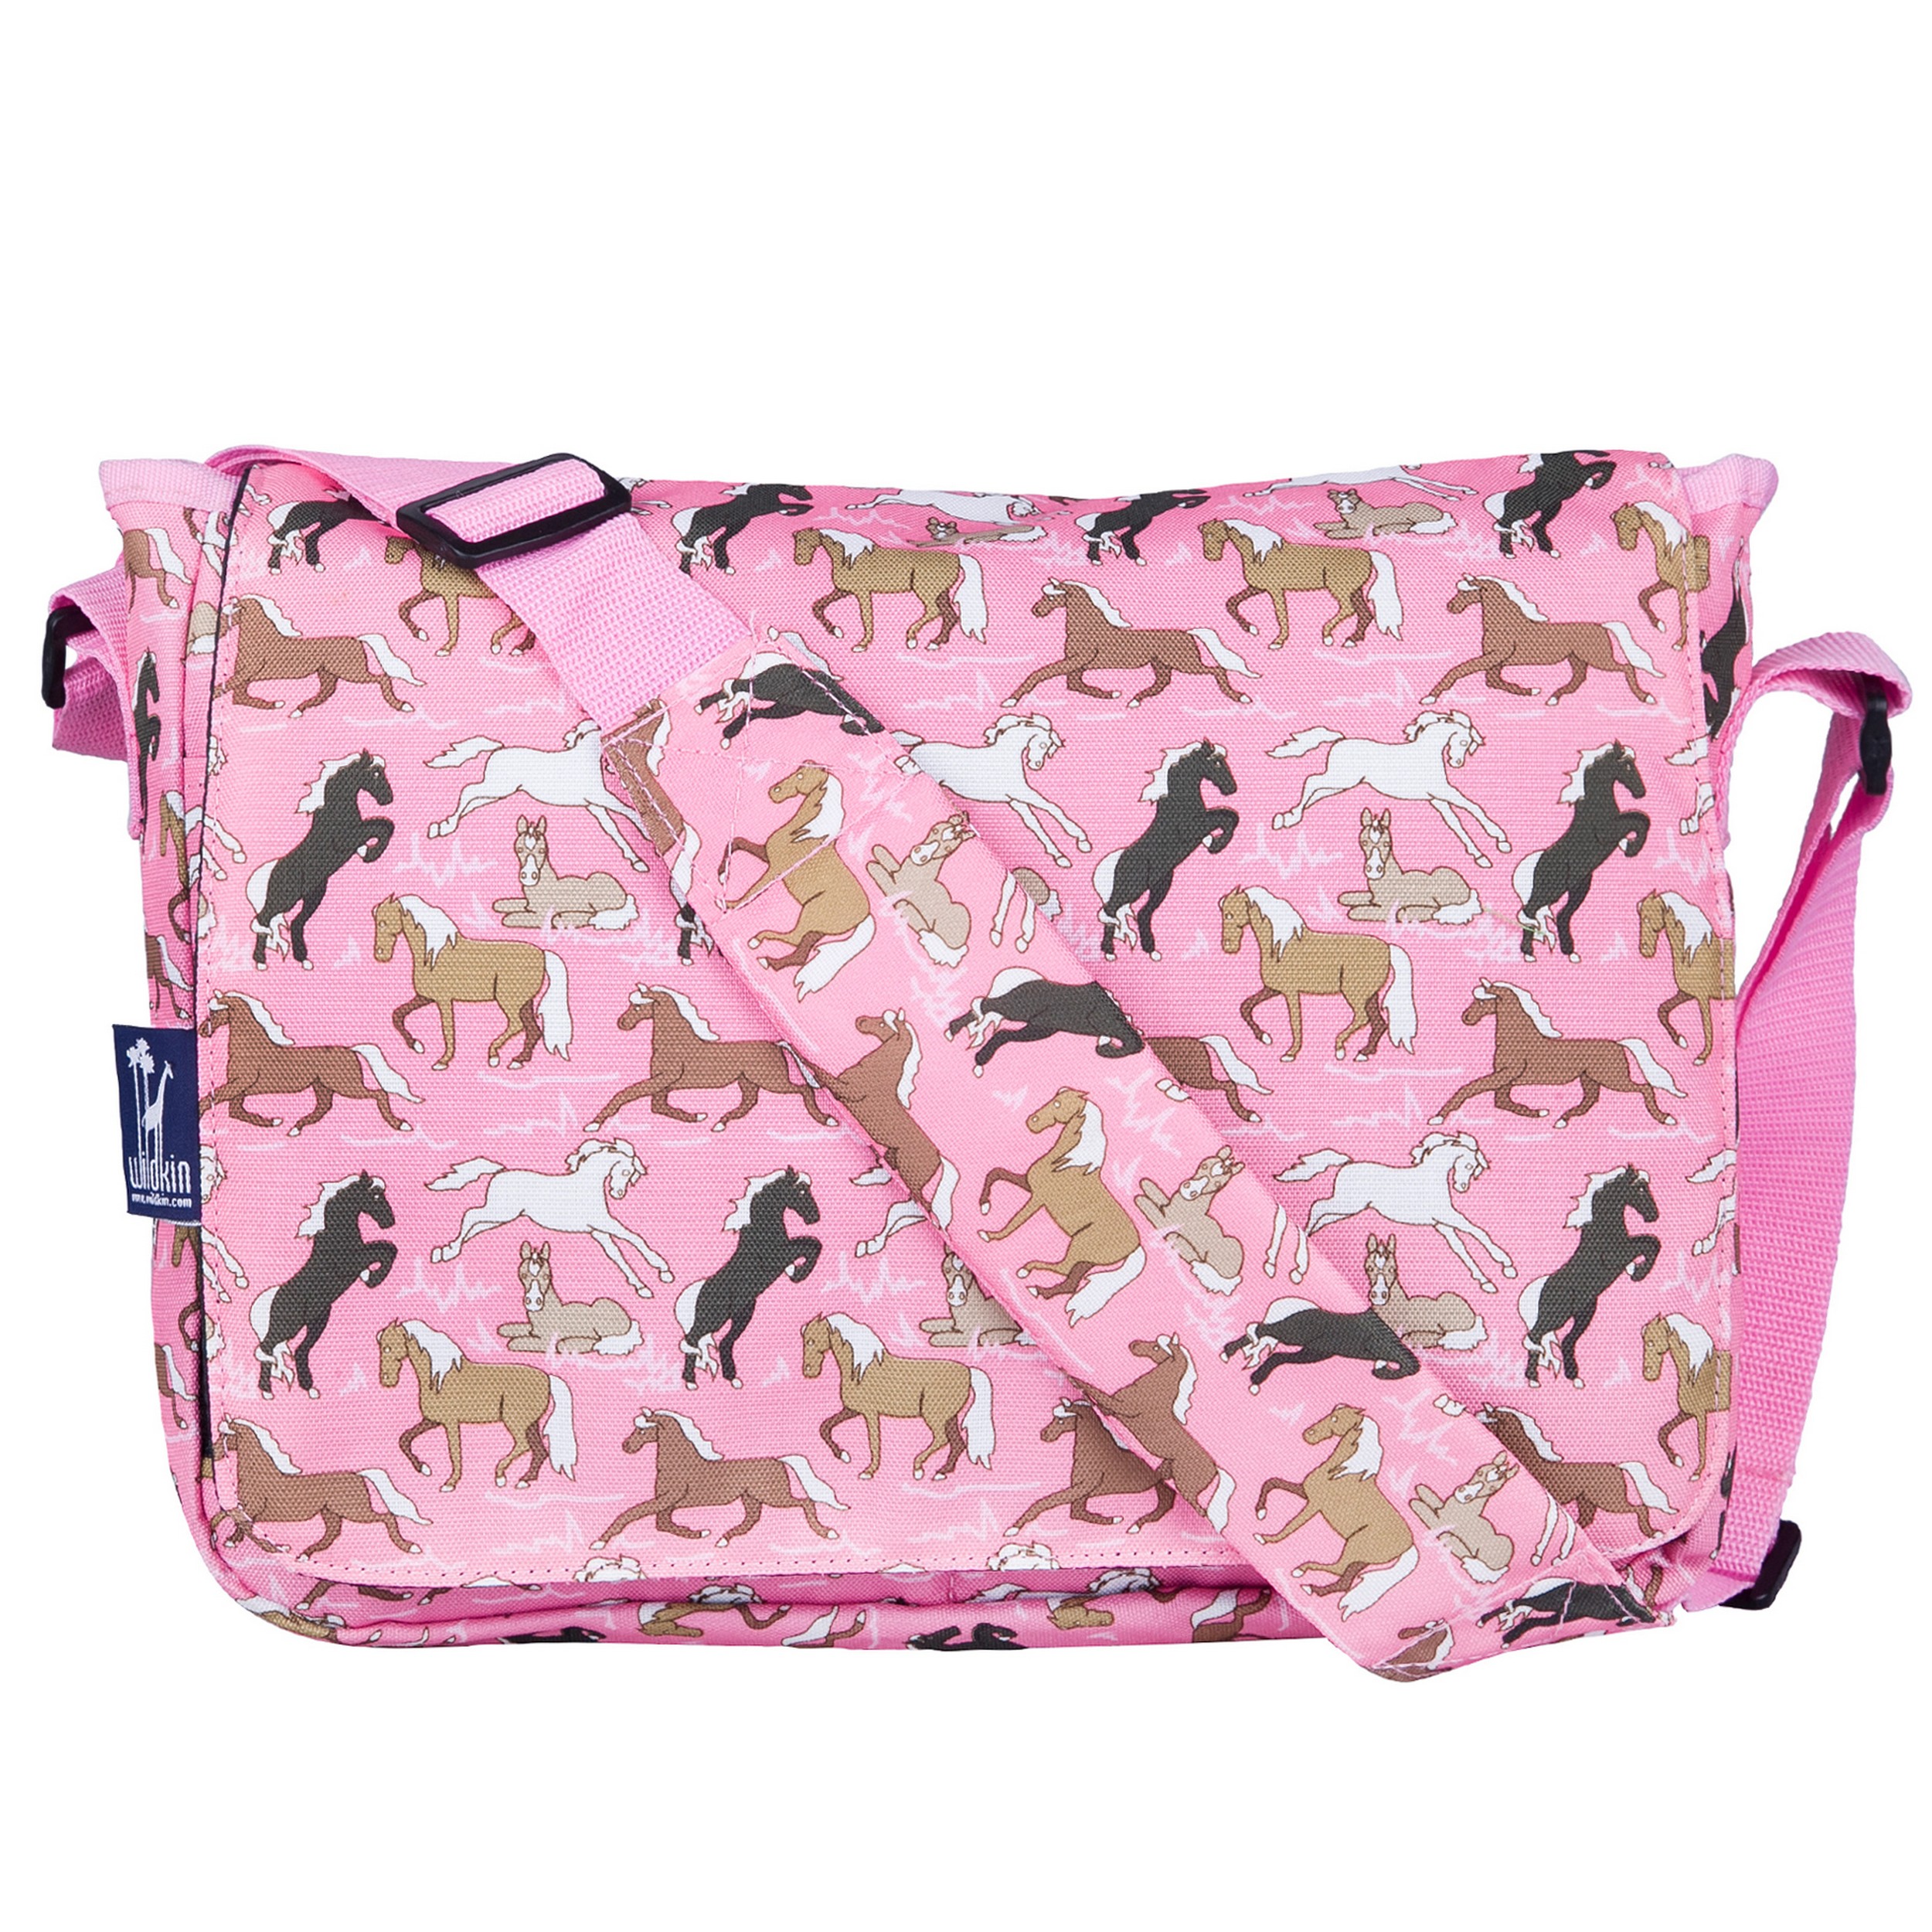 Wildkin Kids Messenger Bag, Perfect for School or Travel, 13 Inch (Horses in Pink) - image 4 of 7